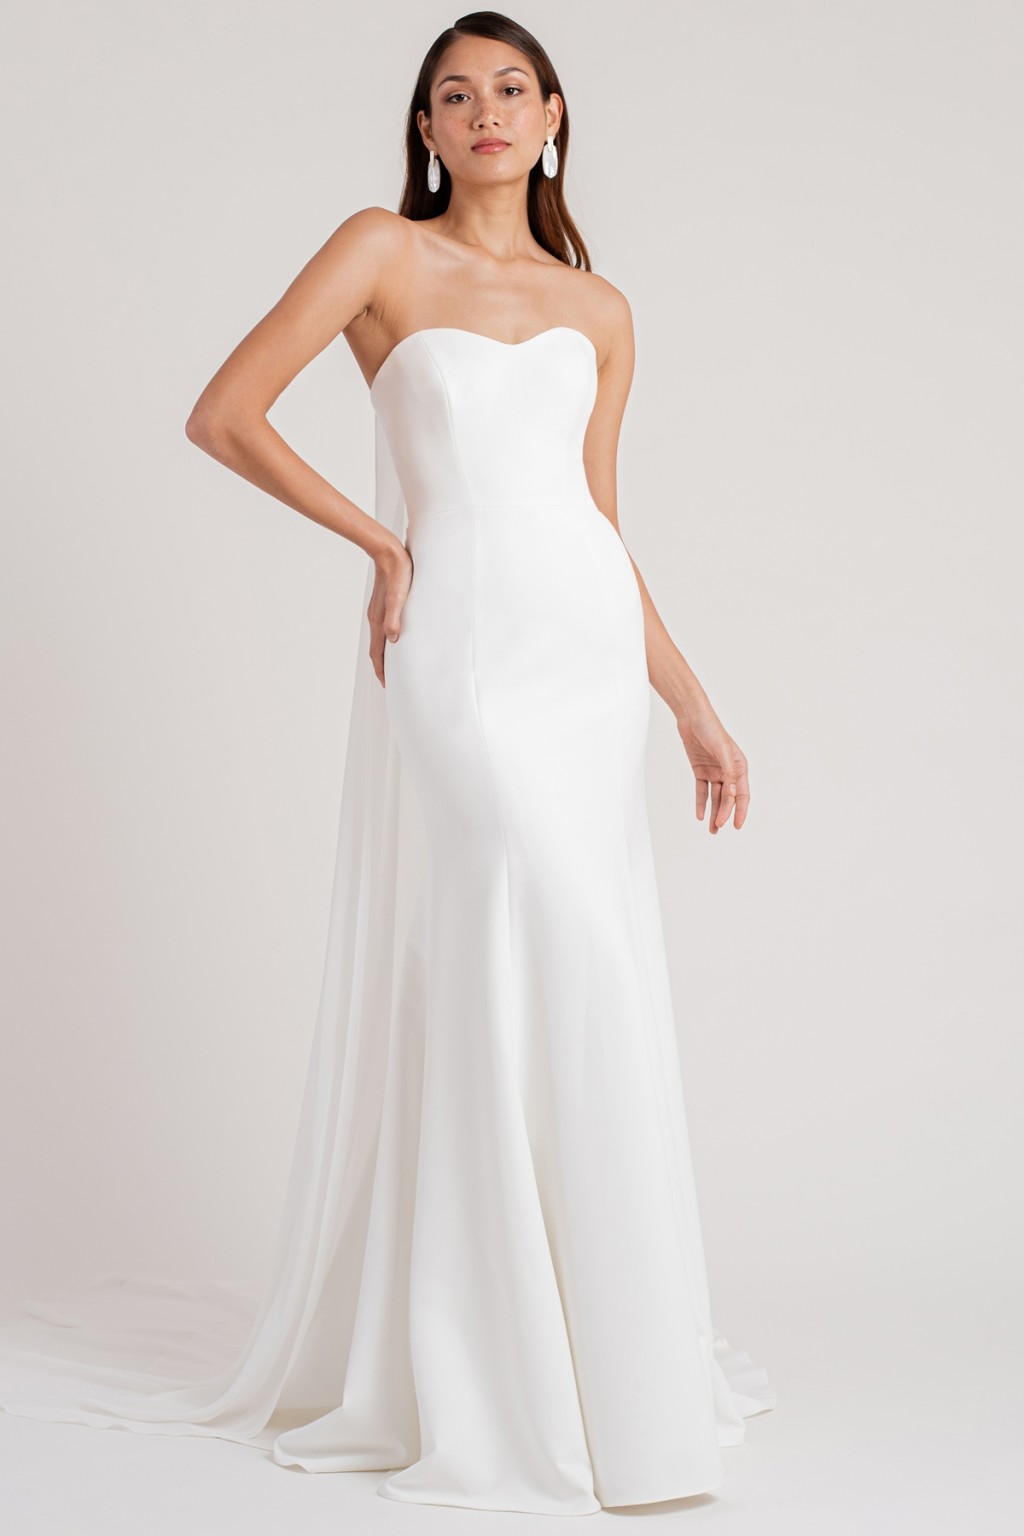 Bennet Ivory Jenny Yoo White Strapless Bridal Gown